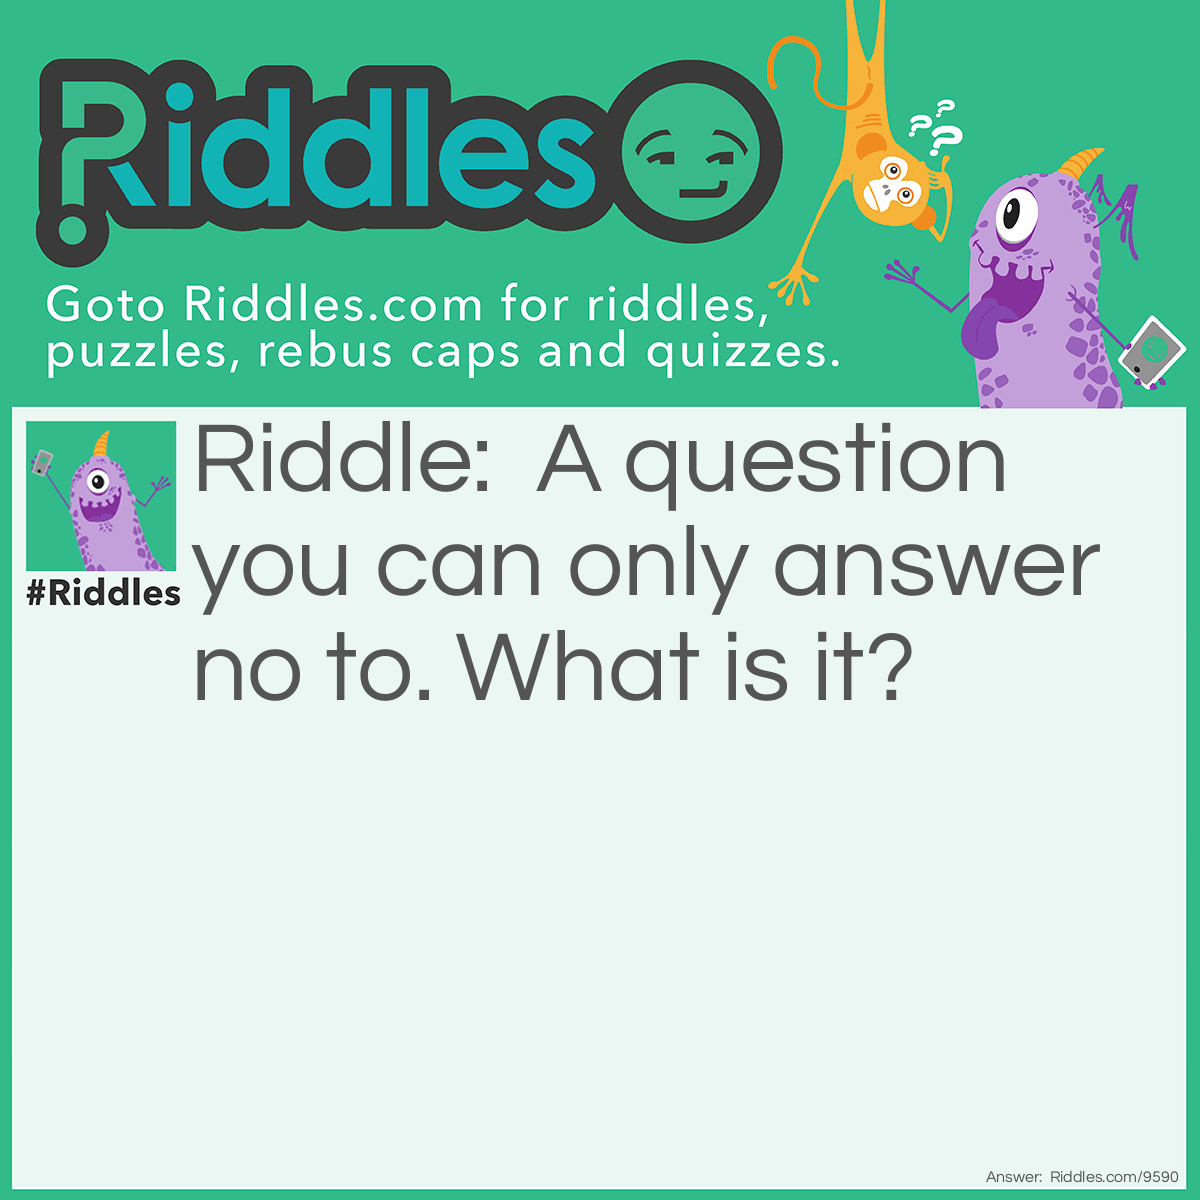 Riddle: A question you can only answer no to. What is it? Answer: Are you dead?